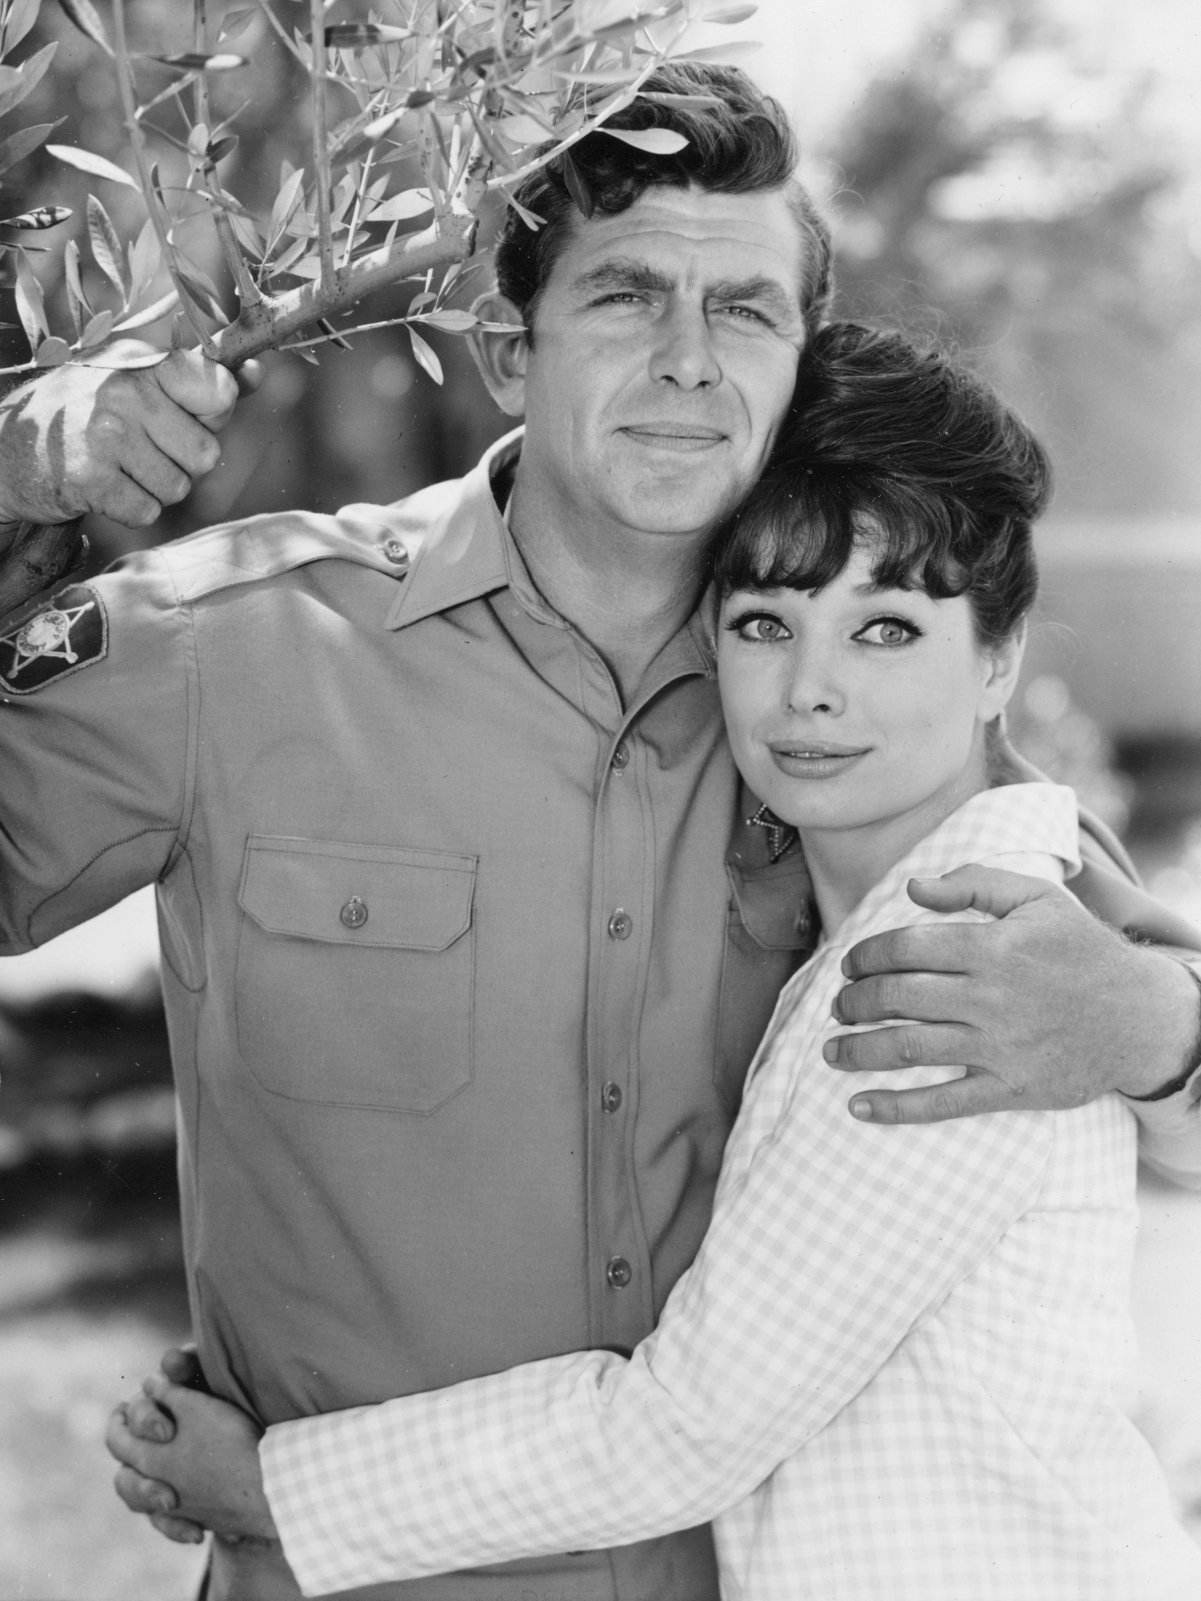 Andy Griffith and Aneta Corsaut stand next to a tree in an embrace, 1964